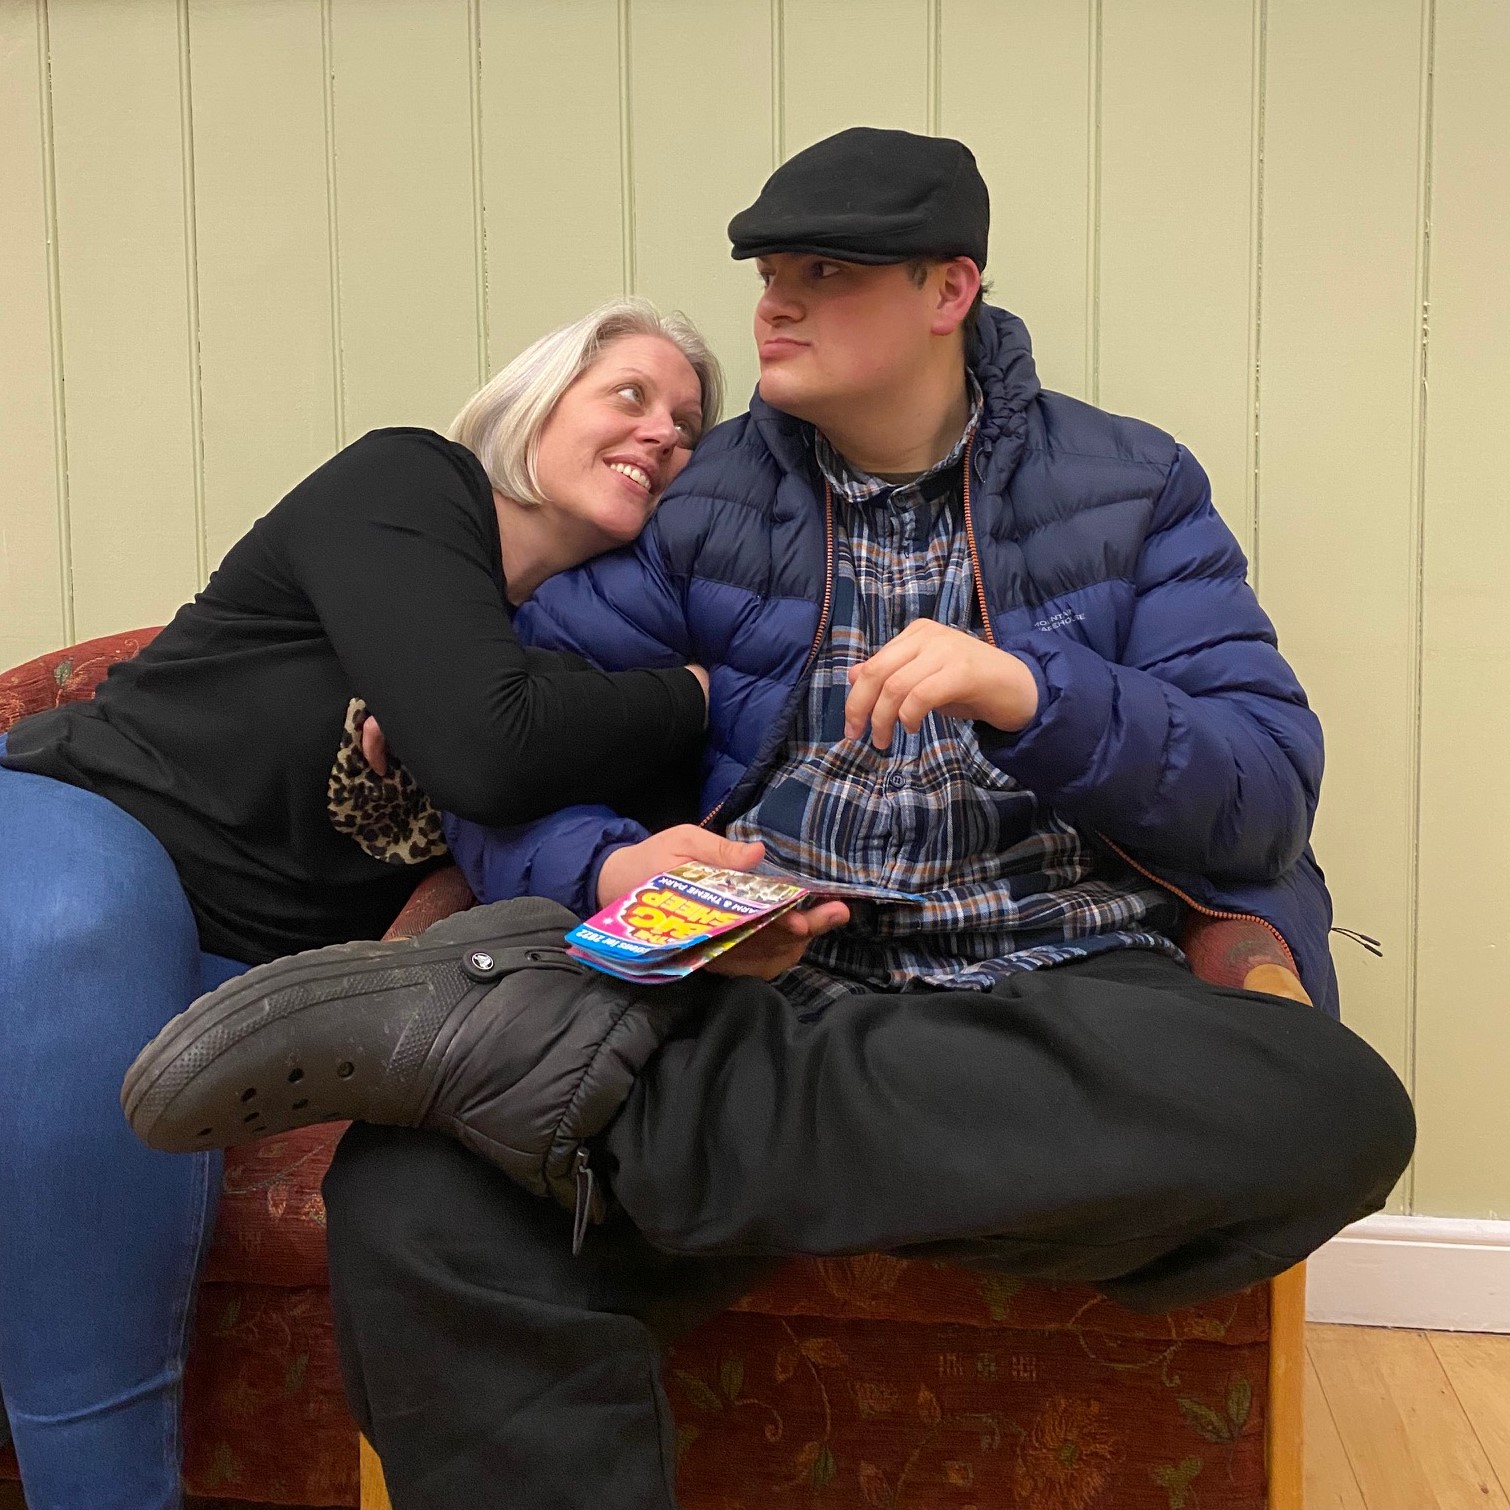 A man is sitting looking away from the camera, wearing a hat and coat, with his leg crossed across the other. He is holding a leaflet and on his arm, is a woman's arm, as she leans her head on his shoulder looking up at him in the chair next to him.